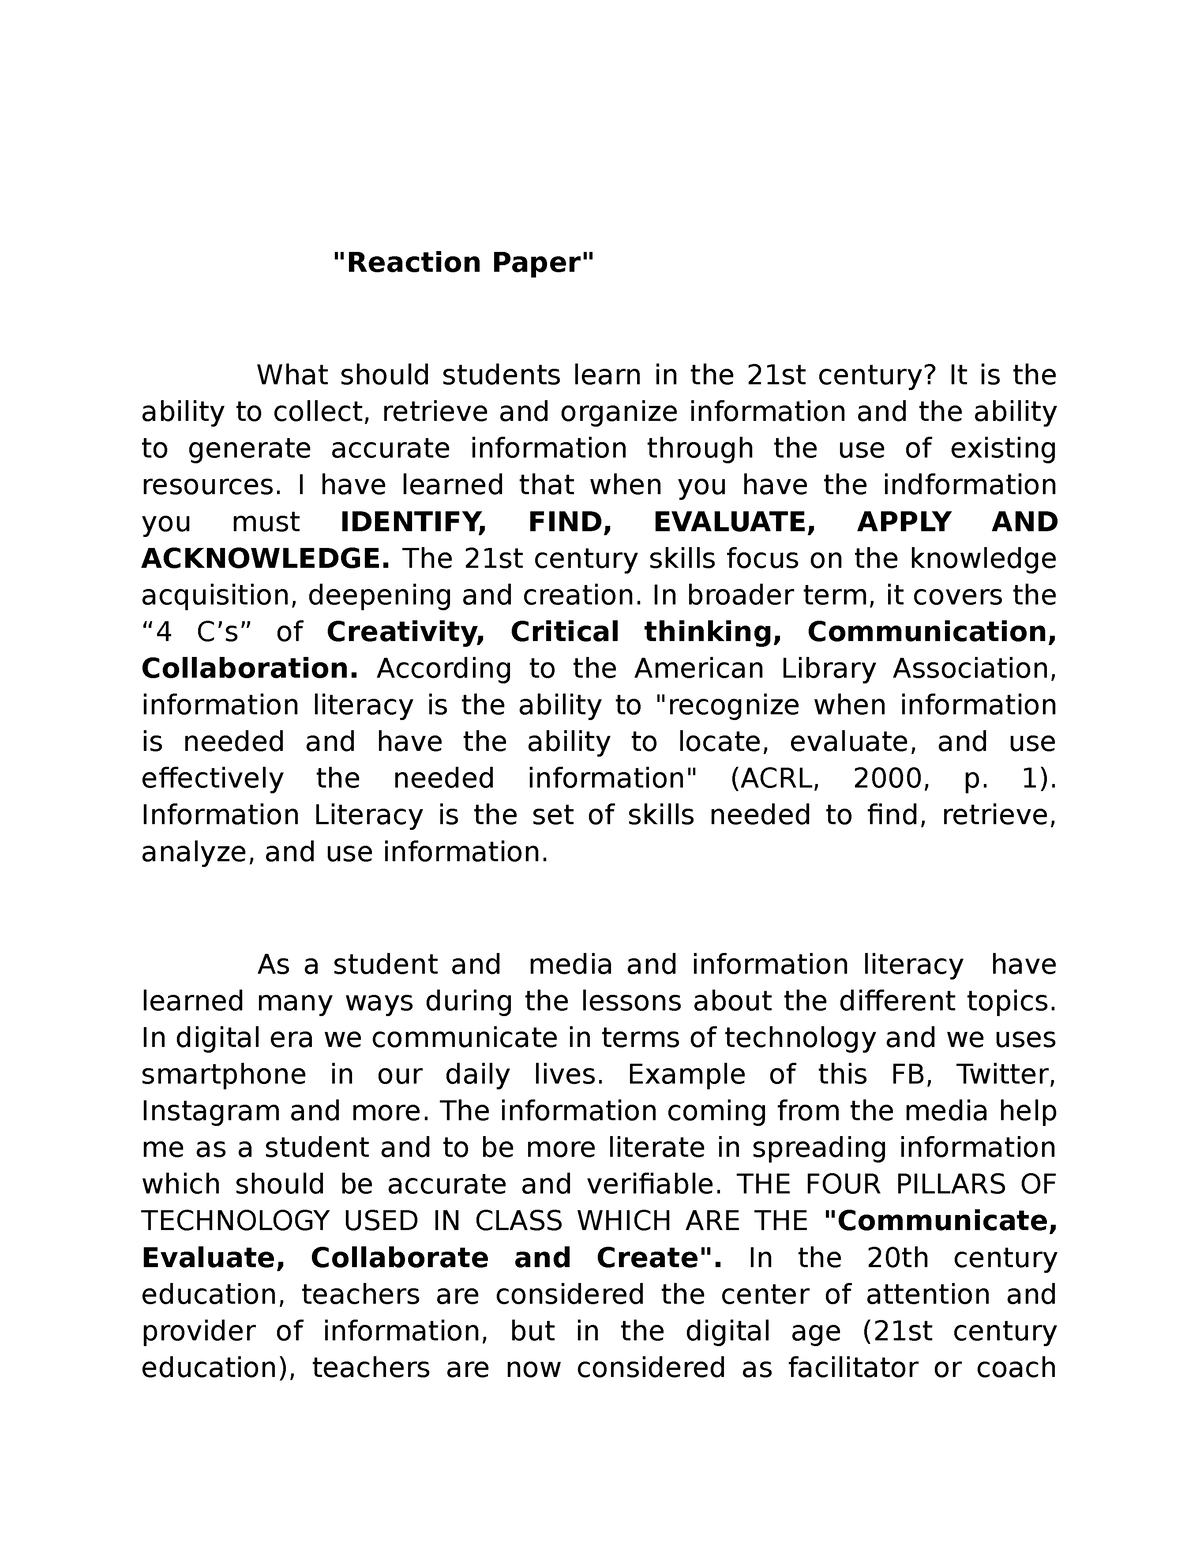 importance of media and information literacy to students essay